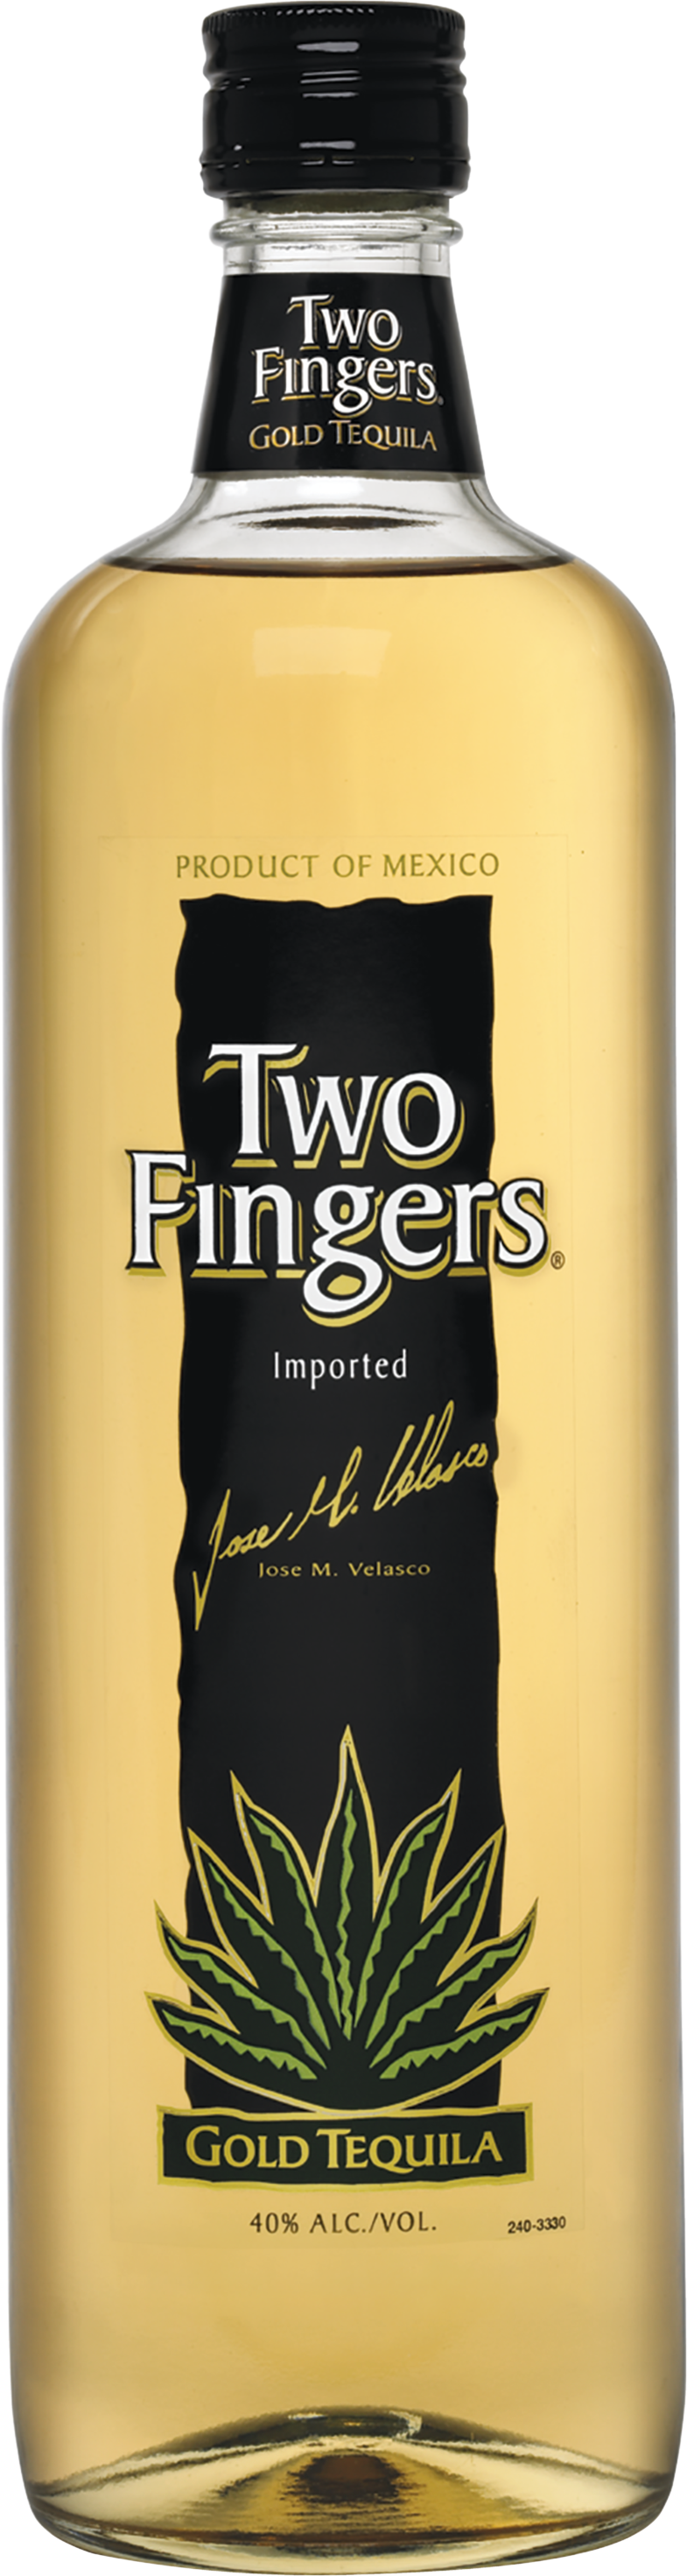 TWO FINGERS GOLD TEQUILA 750ML